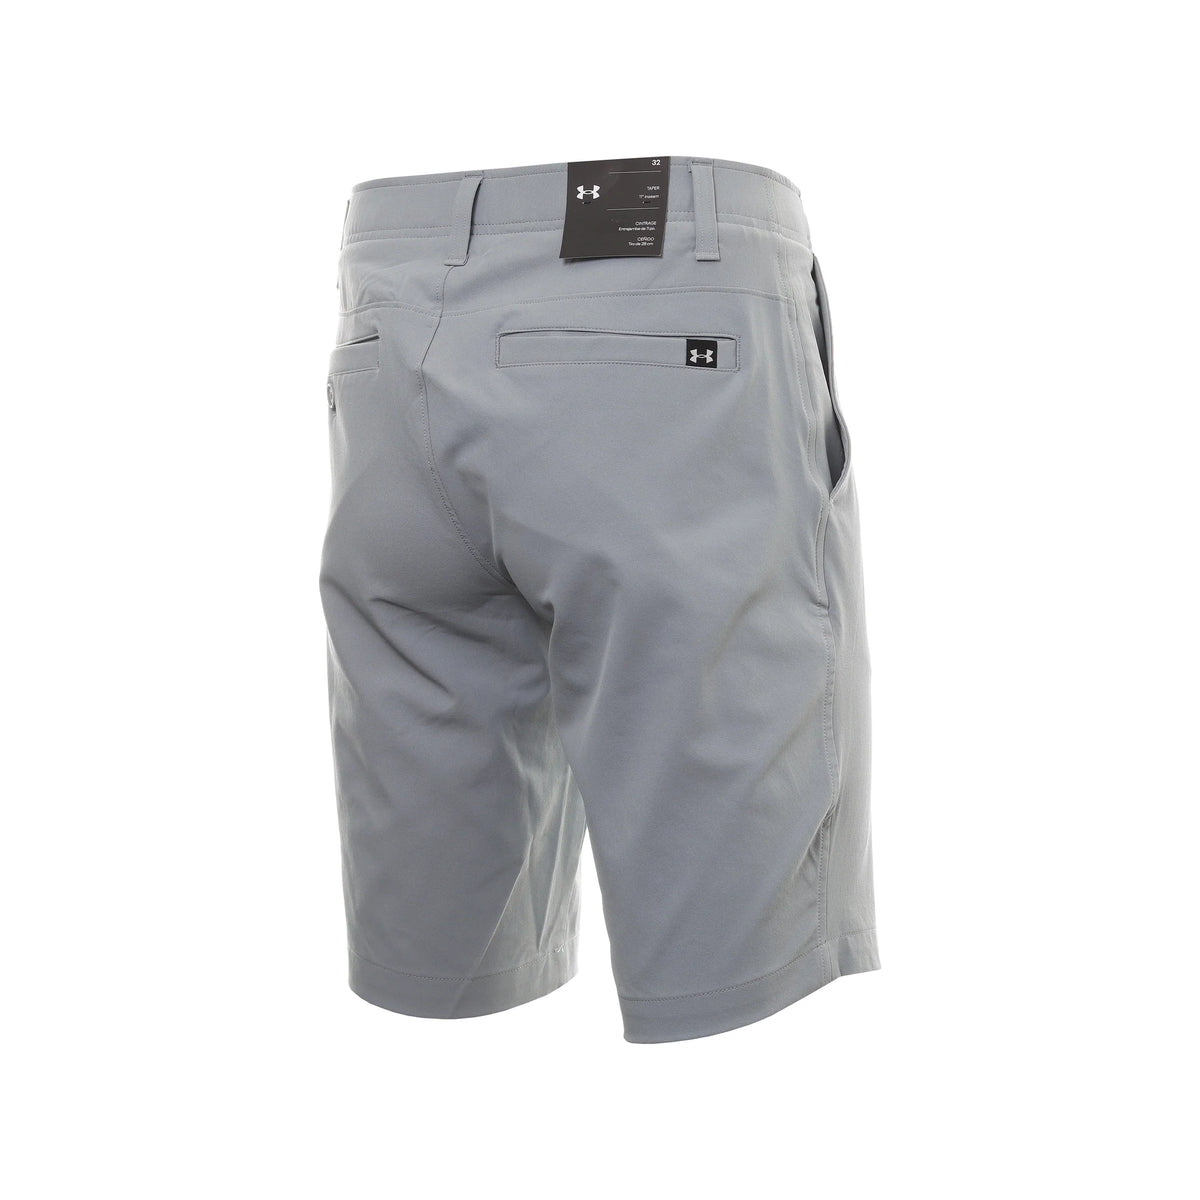 Under Armour Drive Shorts - White